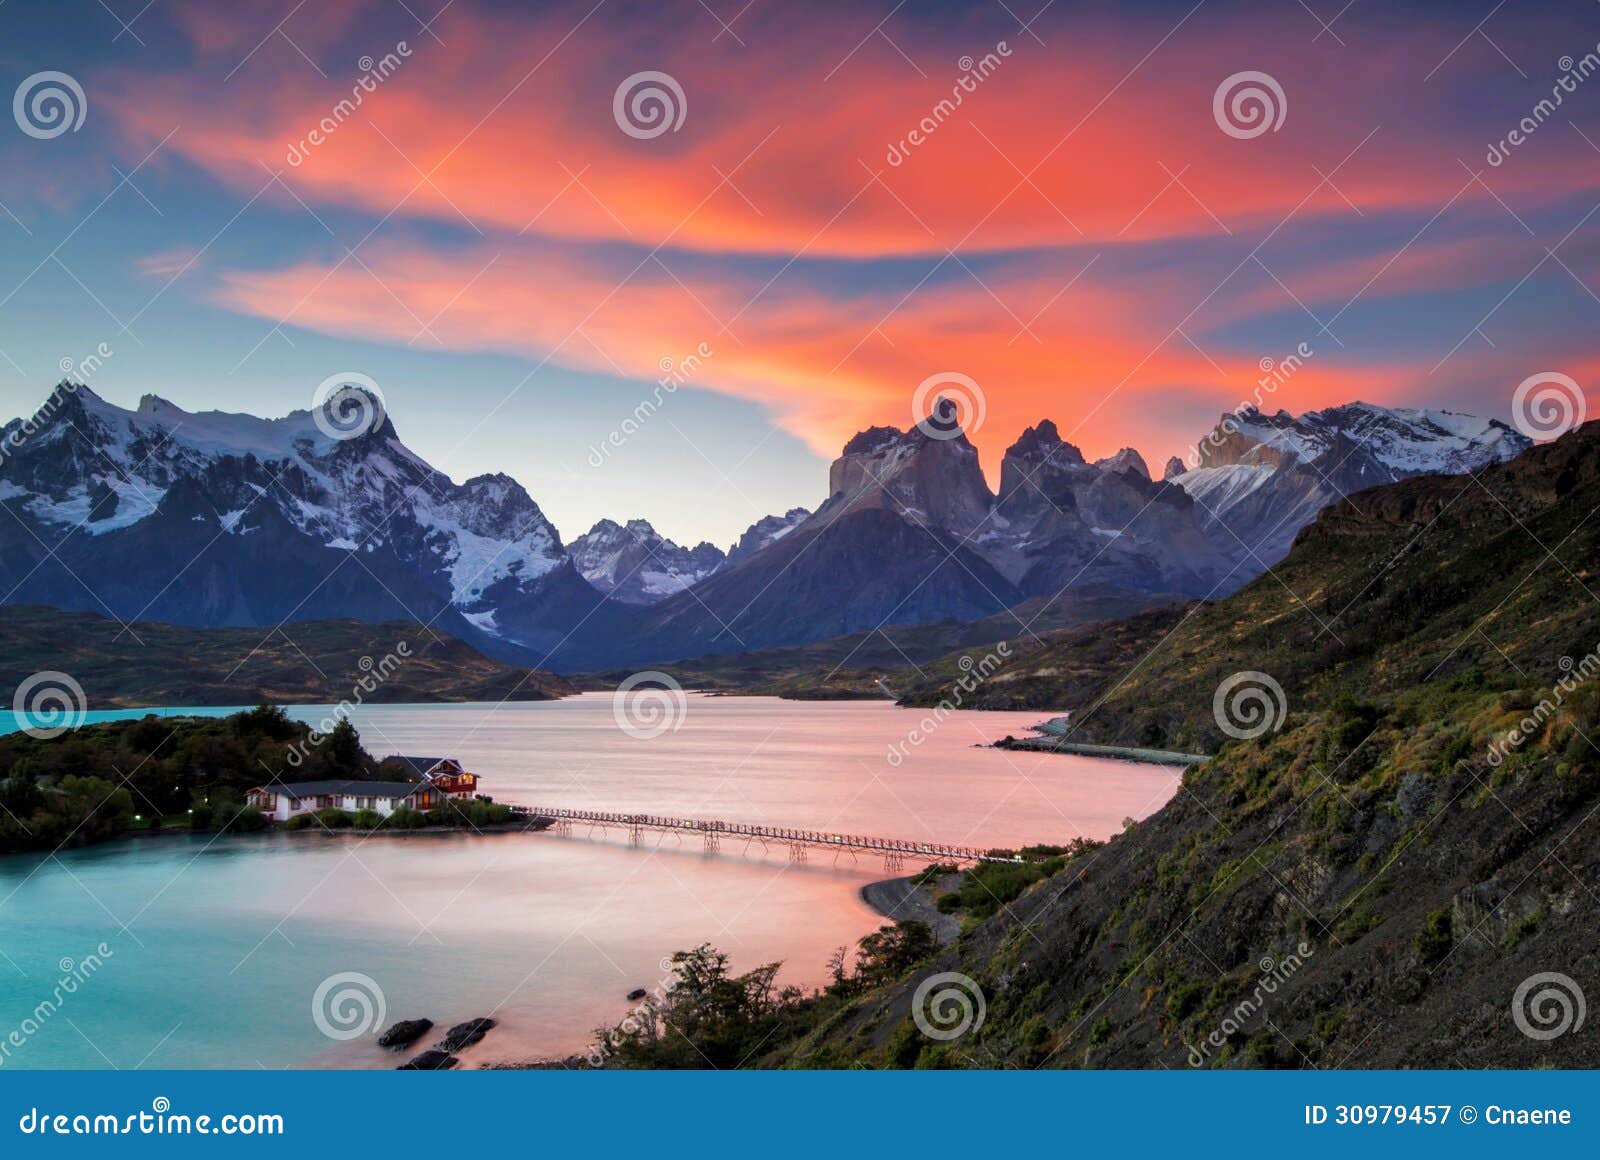 sunset at torres del paine